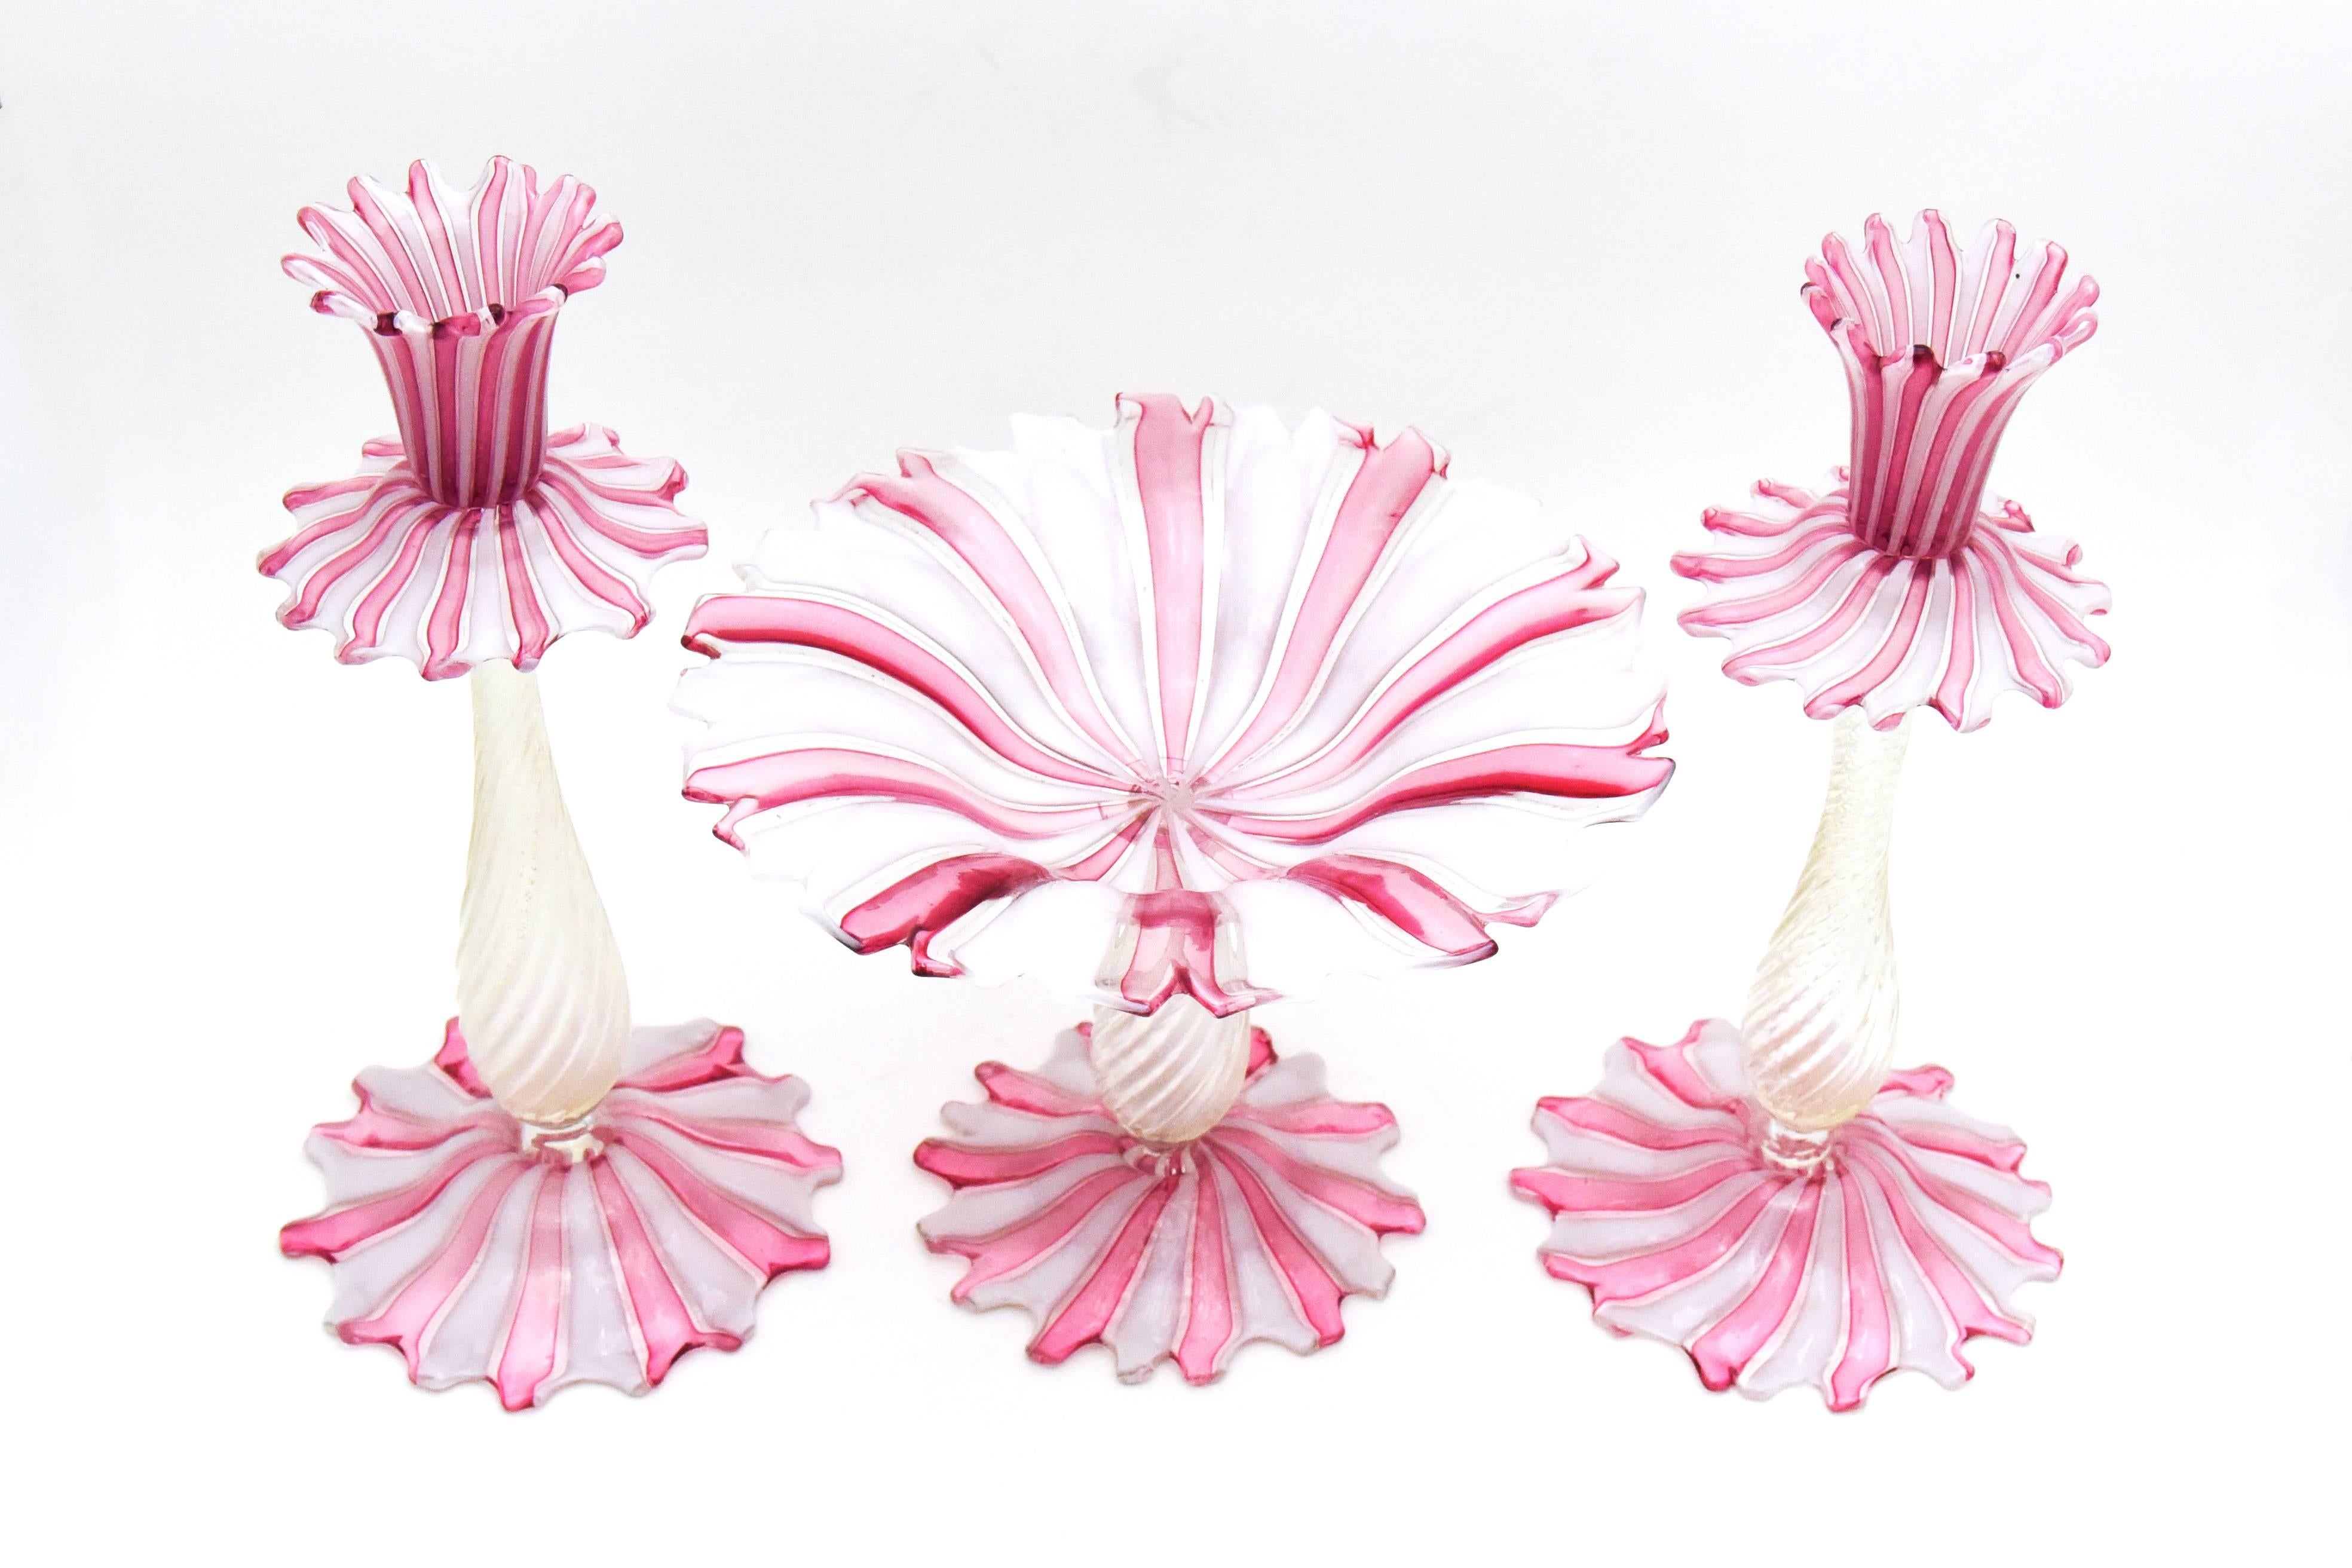 I call this set peppermint candy! This is an unusual design and technique of Venetian glass incorporating the ever popular pink and white stripes with clear optic swirl stems, subtly infused with gold leaf. The feet and bobeches have the added